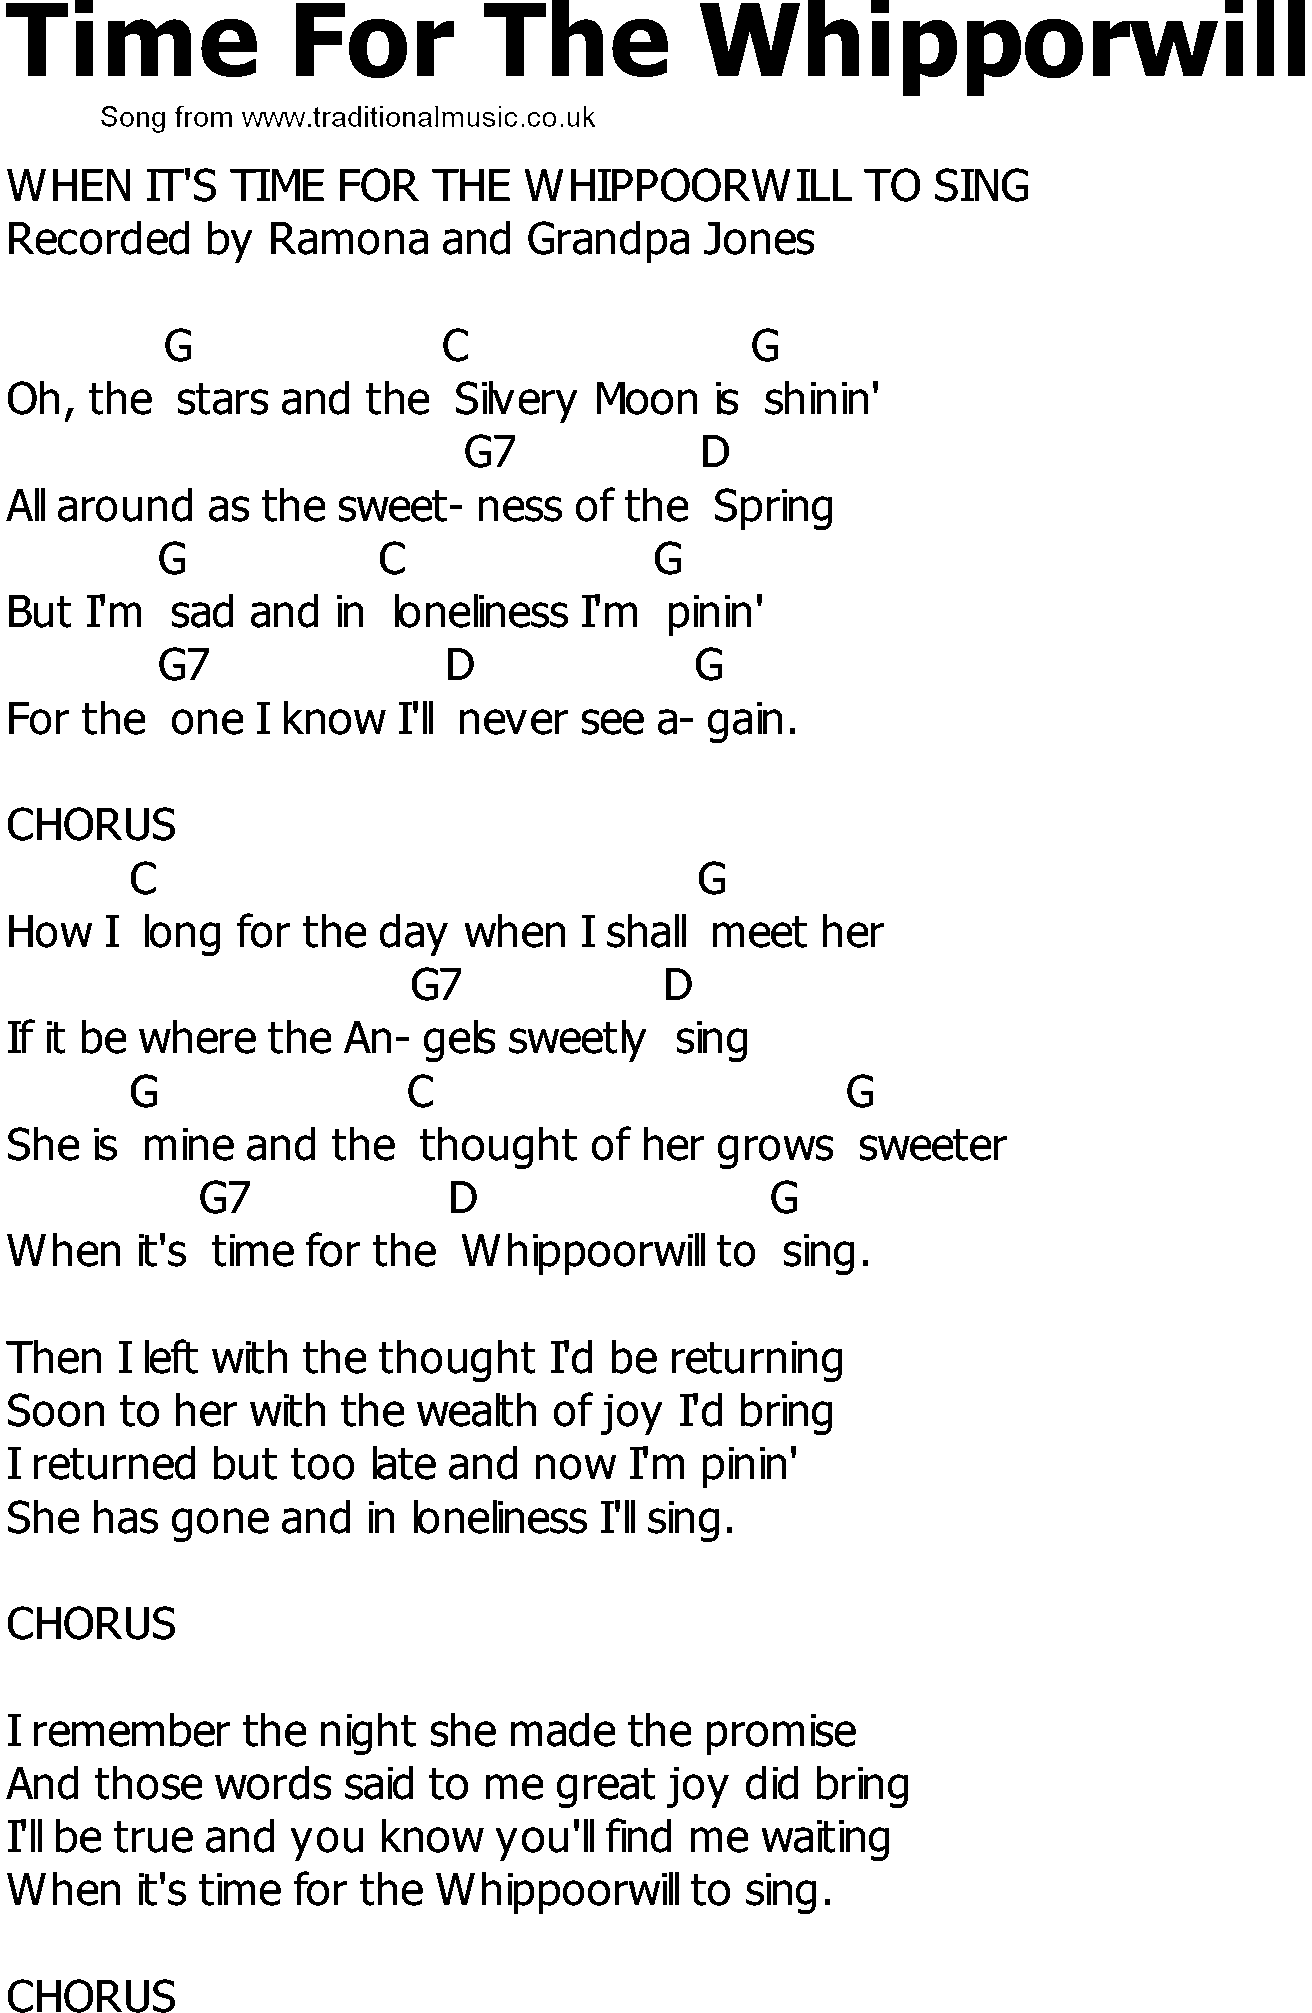 Old Country song lyrics with chords - Time For The Whipporwill